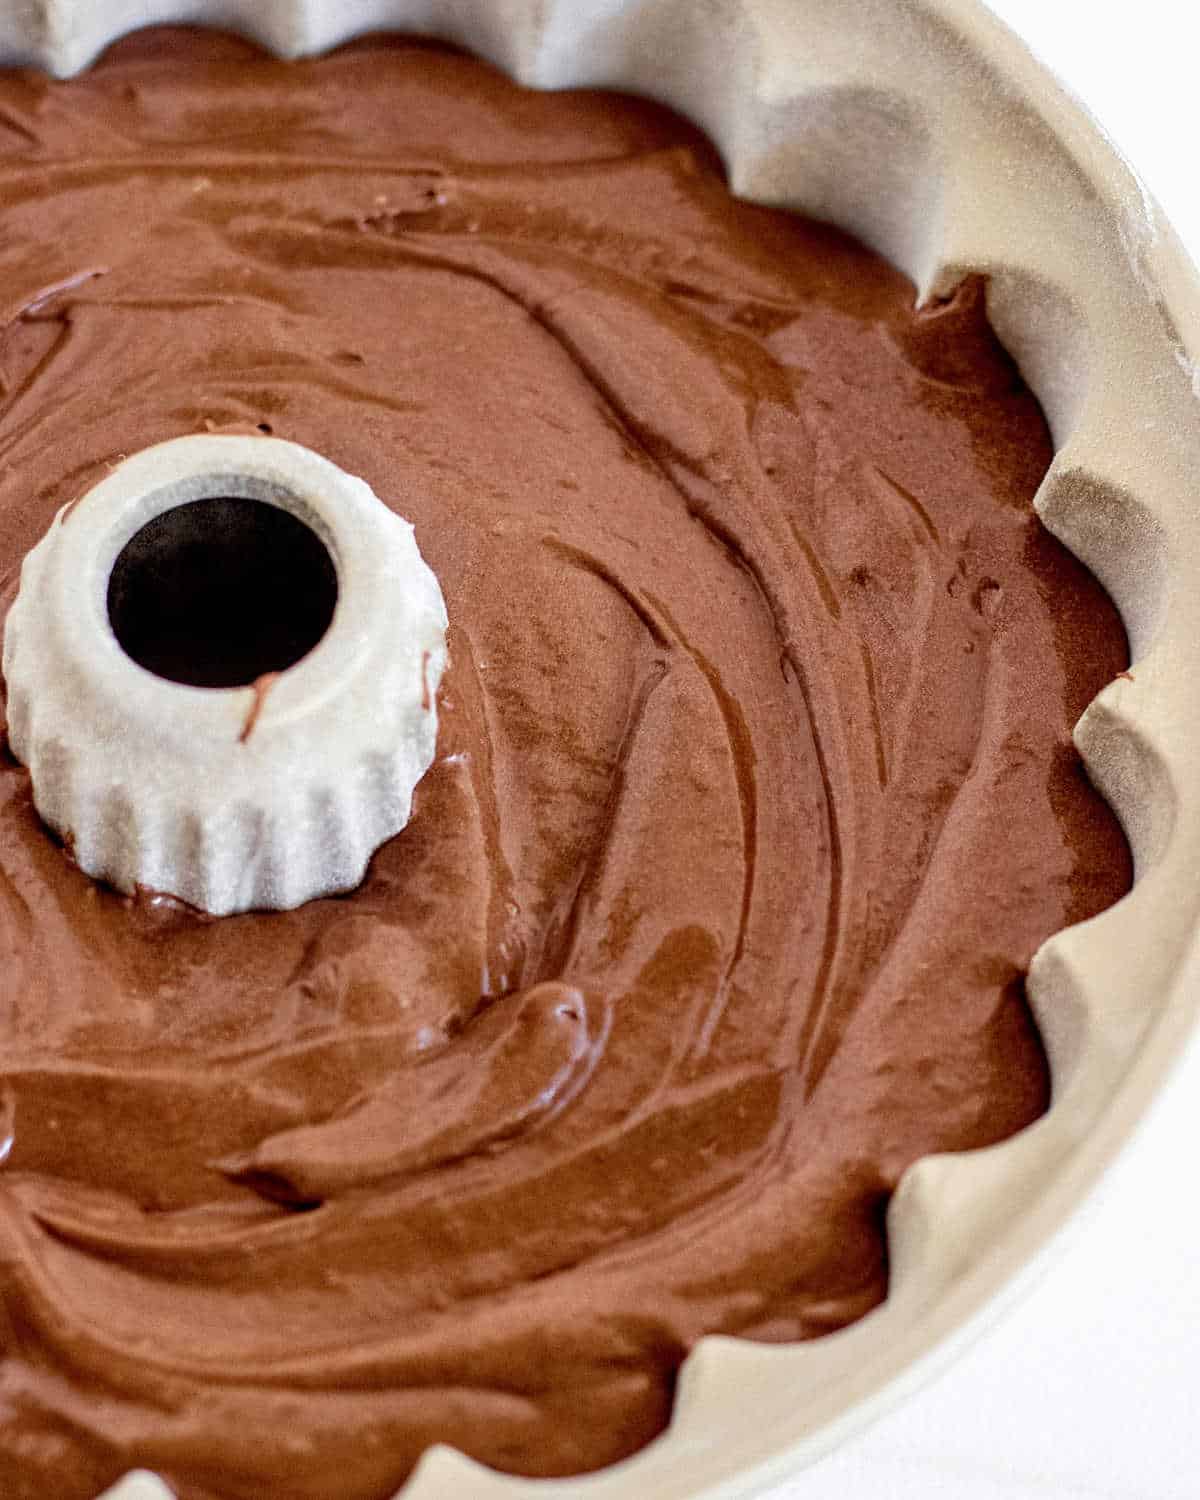 Chocolate cake batter in a bundt pan. Partial view.